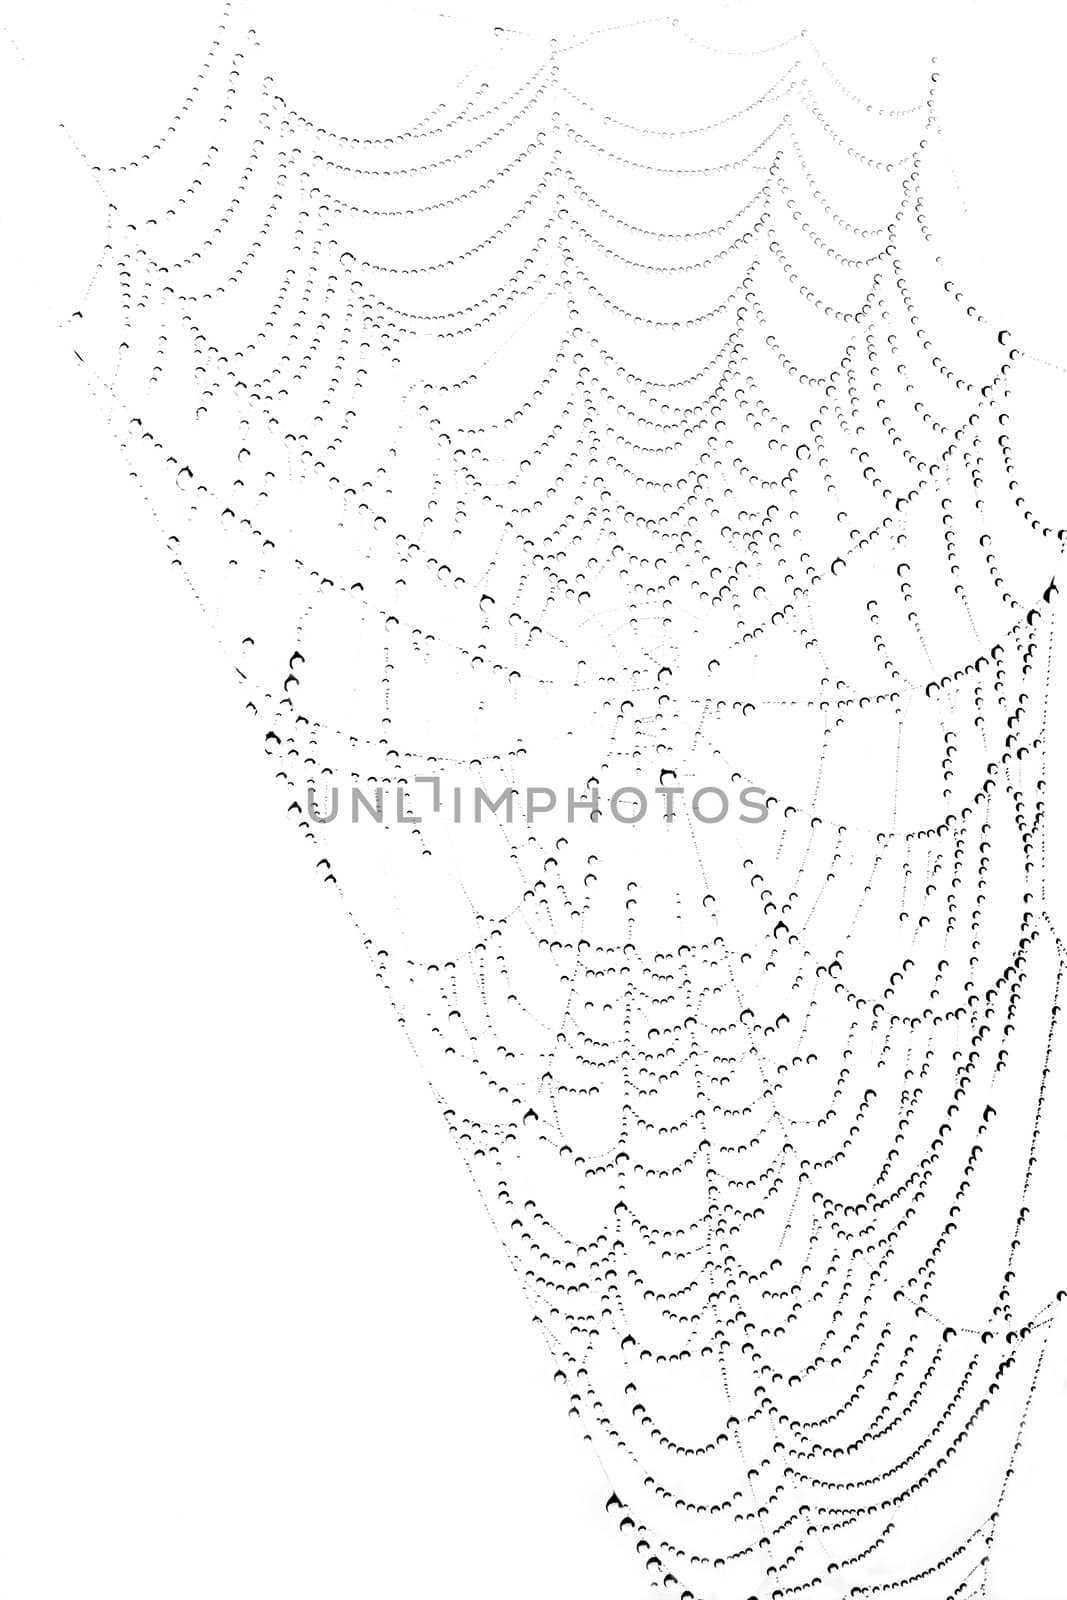 Spiderweb wirh fog-drops isolated on white background - black and white image